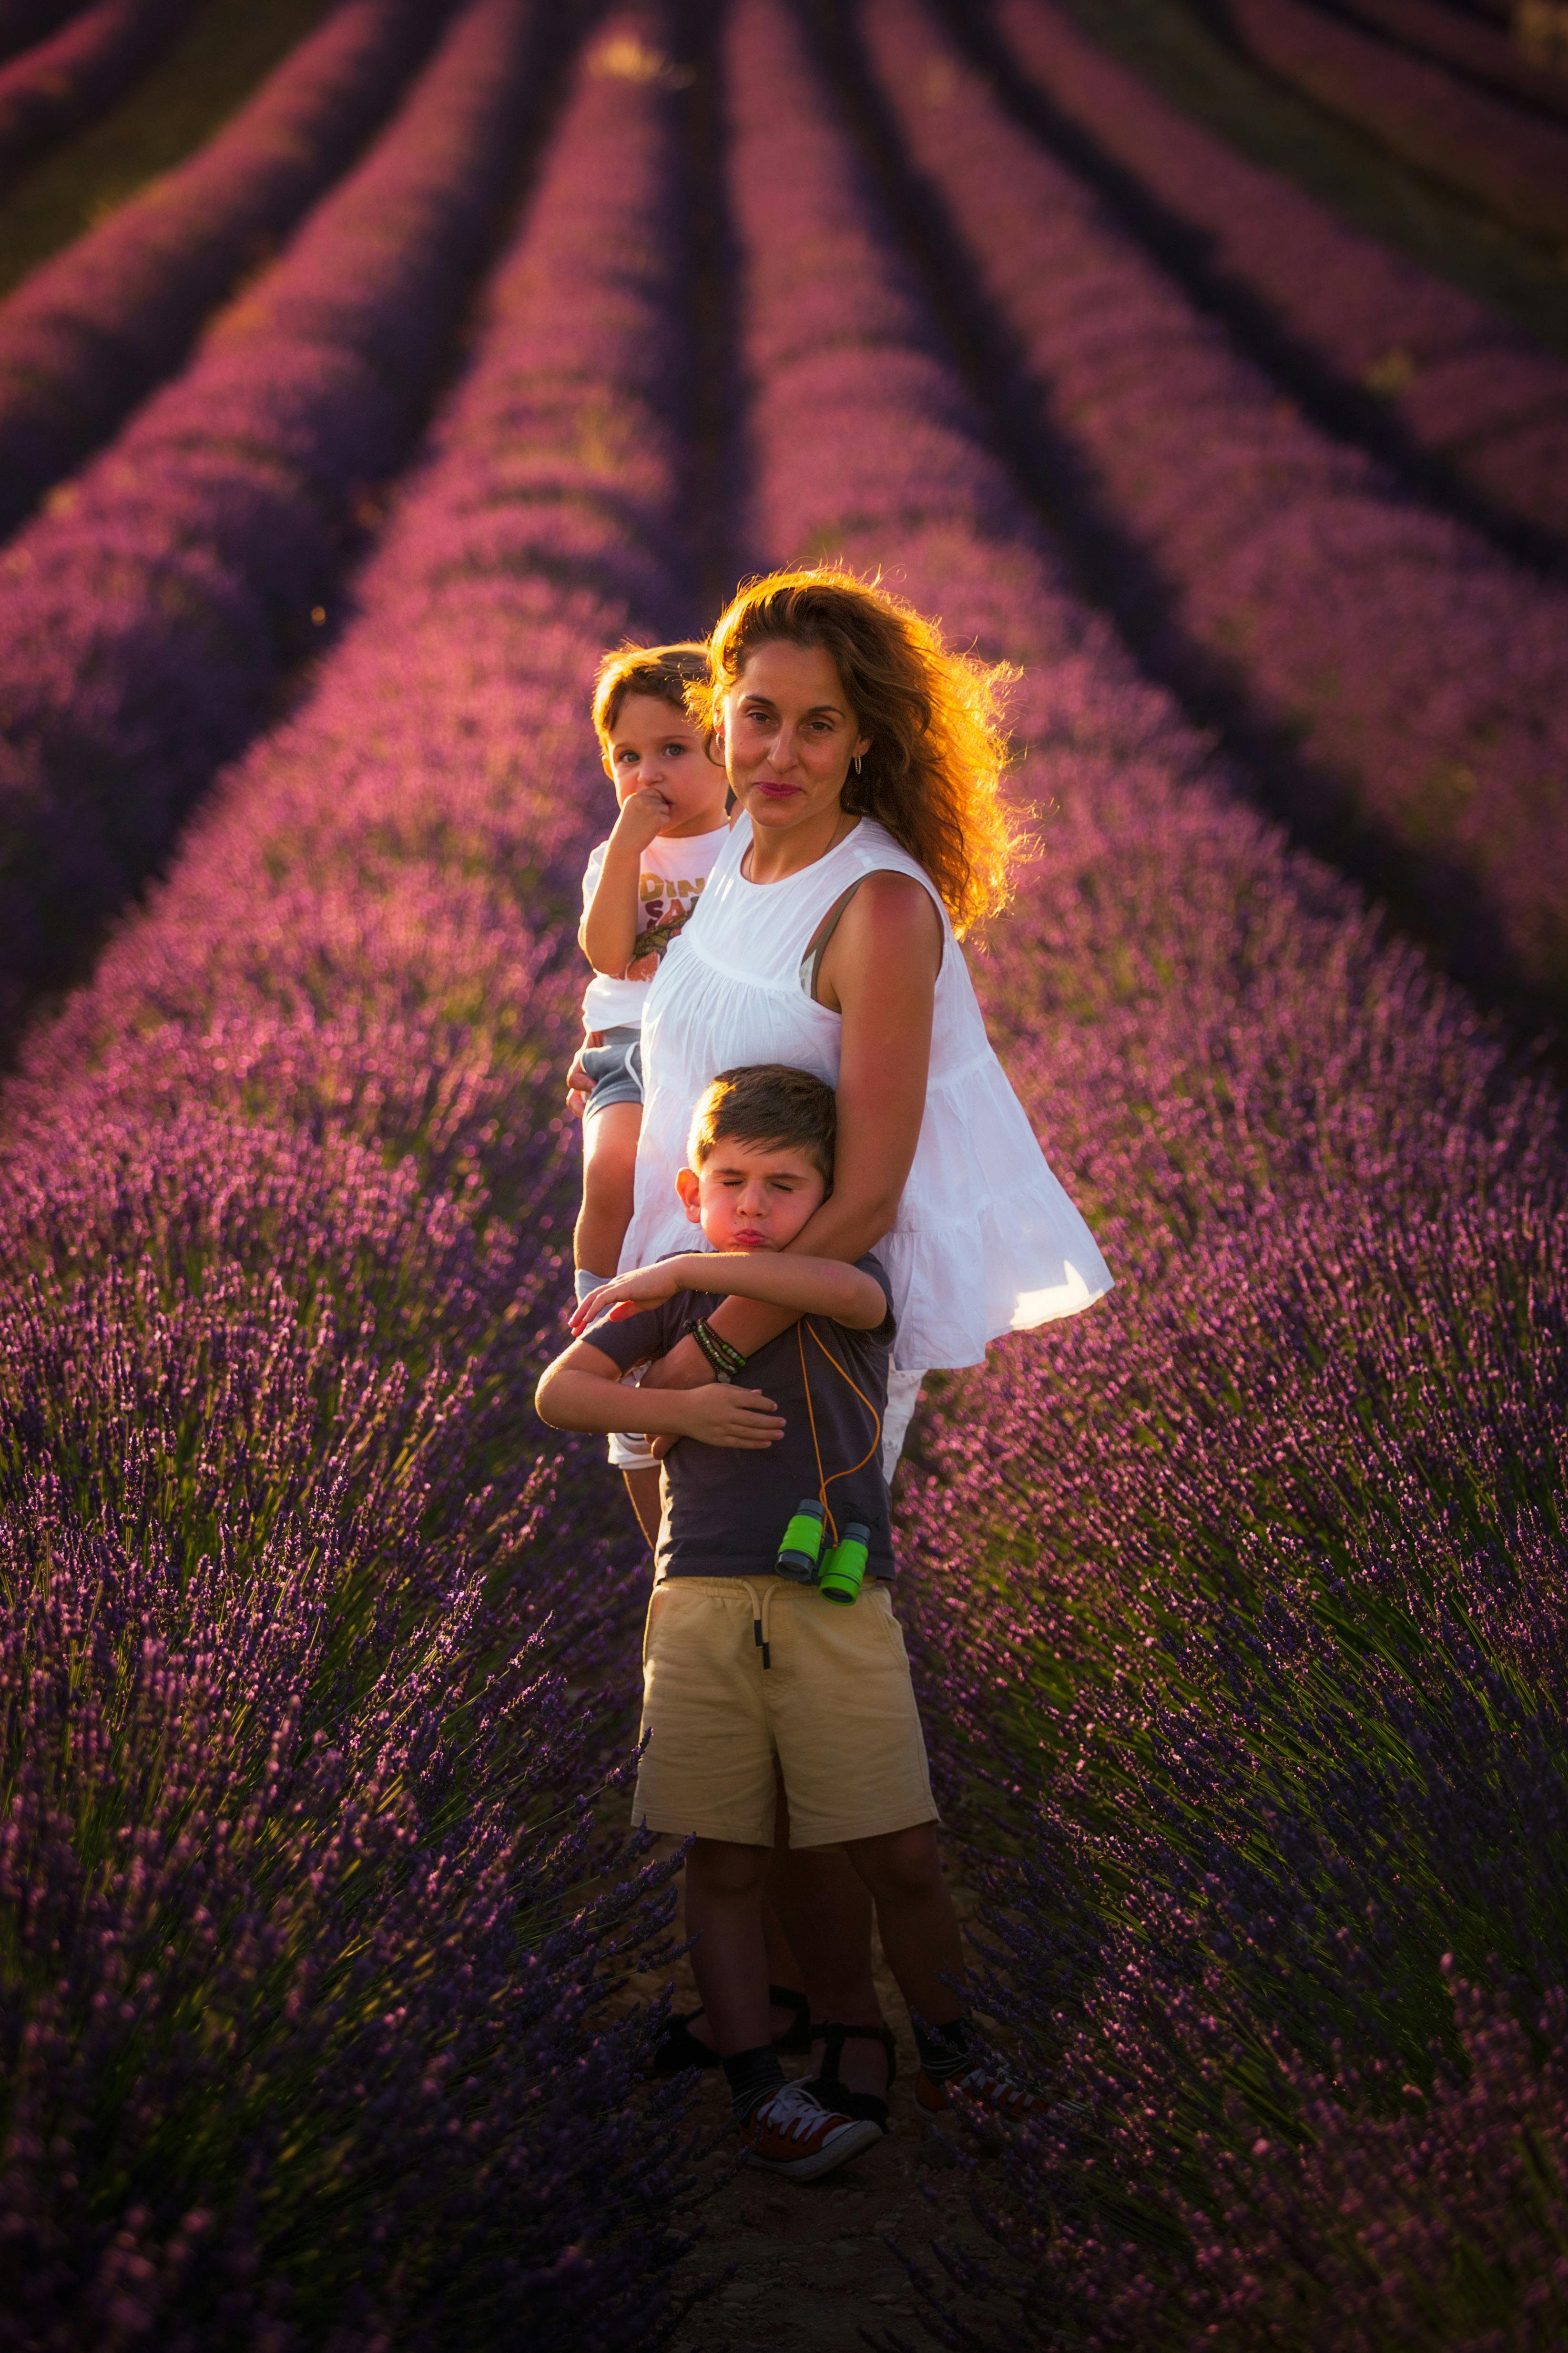 Family Time on Lavenders (VI)